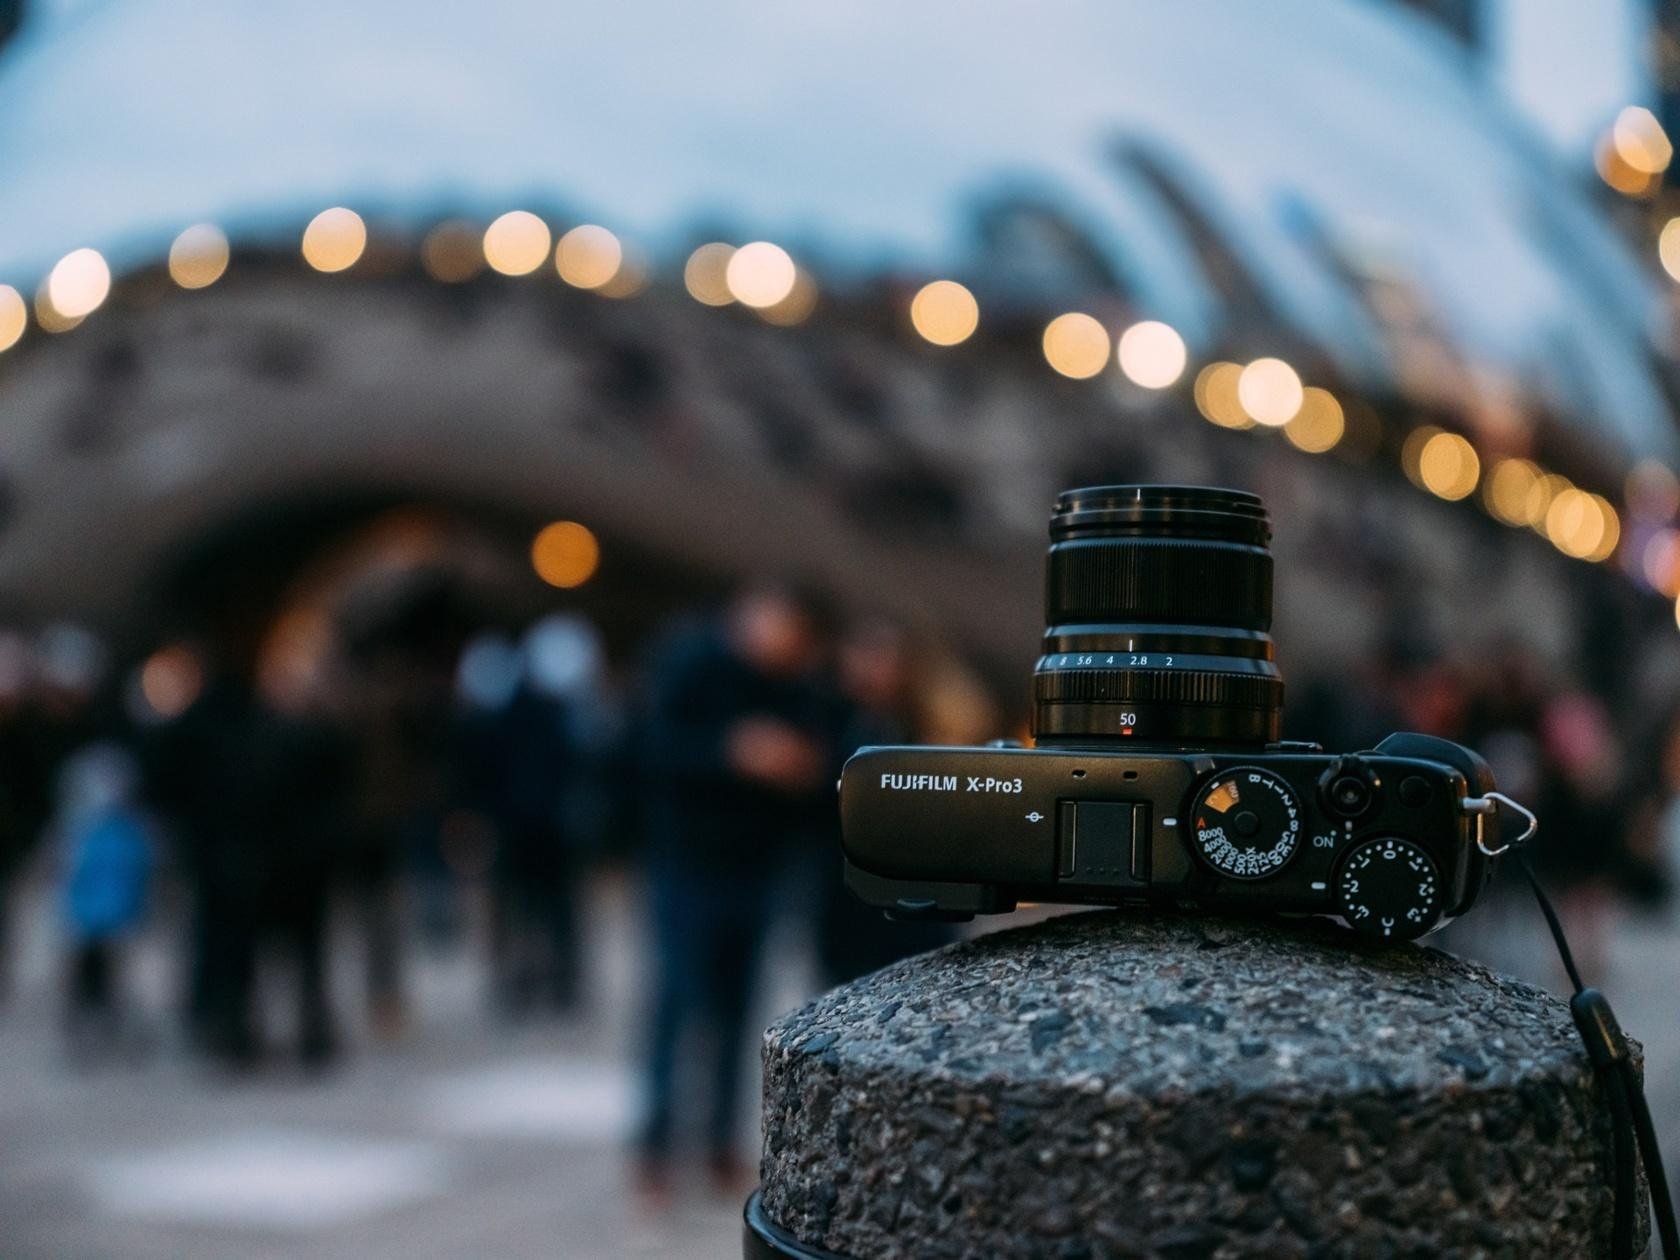 Is this the Best Travel Camera for Professional Photographers